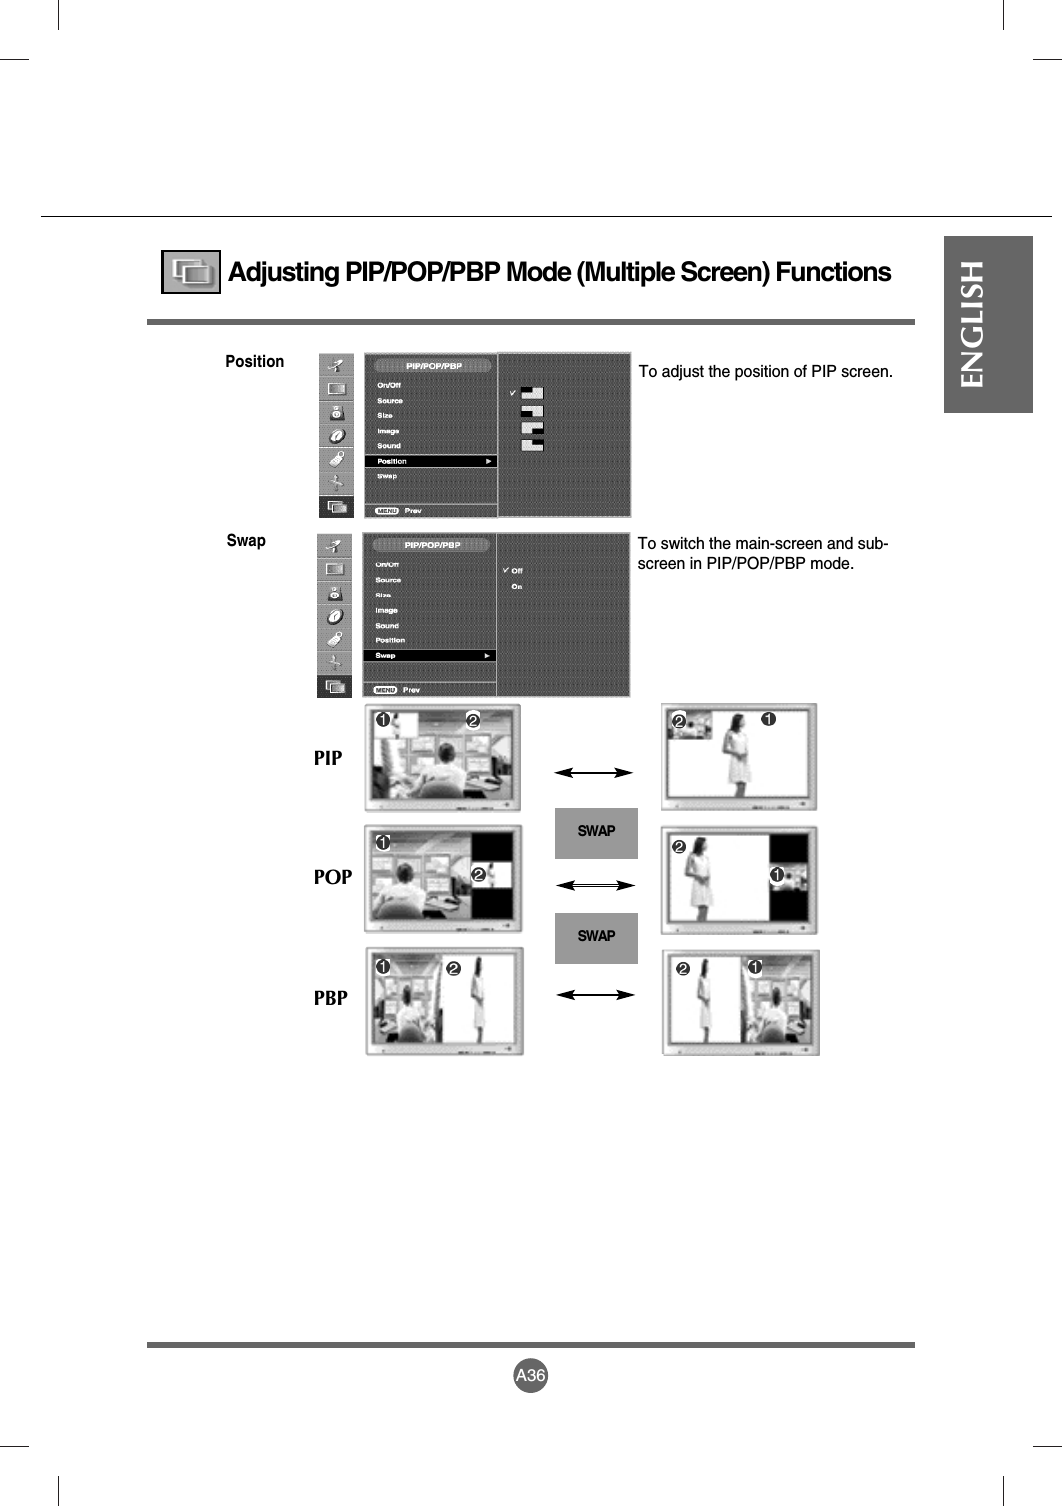 A36ENGLISHTo adjust the position of PIP screen.PositionAdjusting PIP/POP/PBP Mode (Multiple Screen) FunctionsSWAPSWAPPIPPOPPBPTo switch the main-screen and sub-screen in PIP/POP/PBP mode.Swap